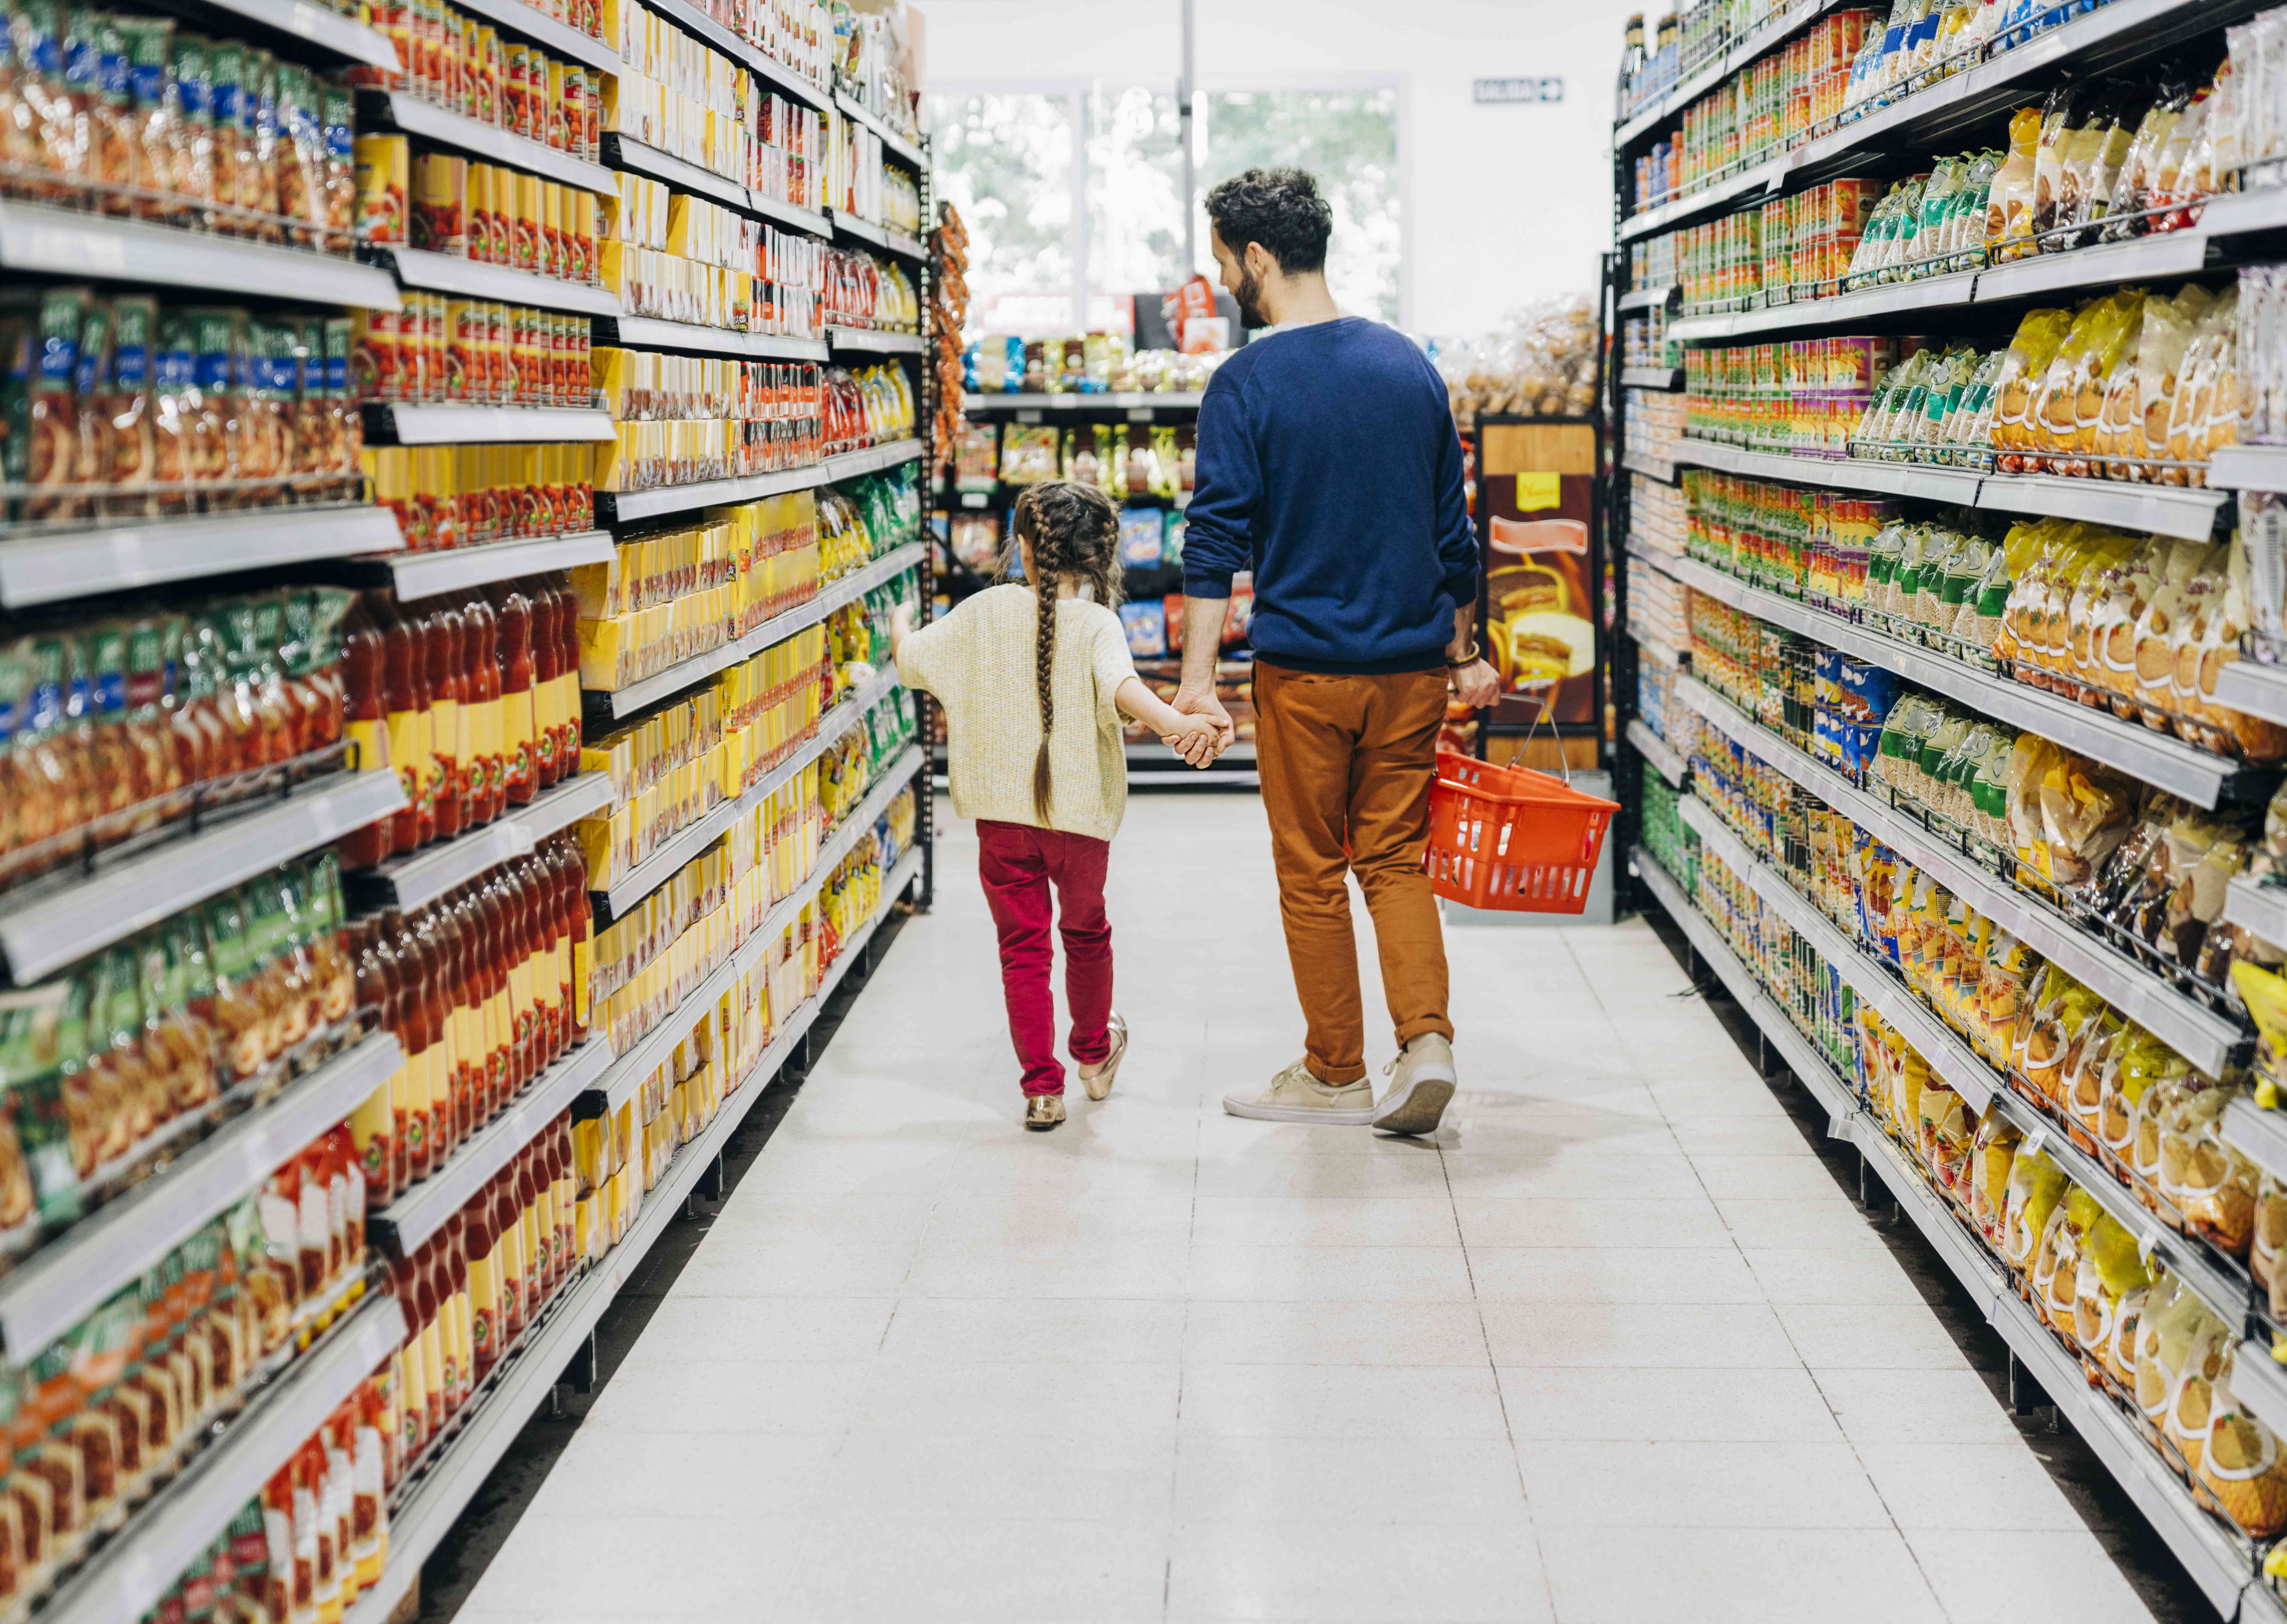 Father and daughter walking down a grocery aisle.